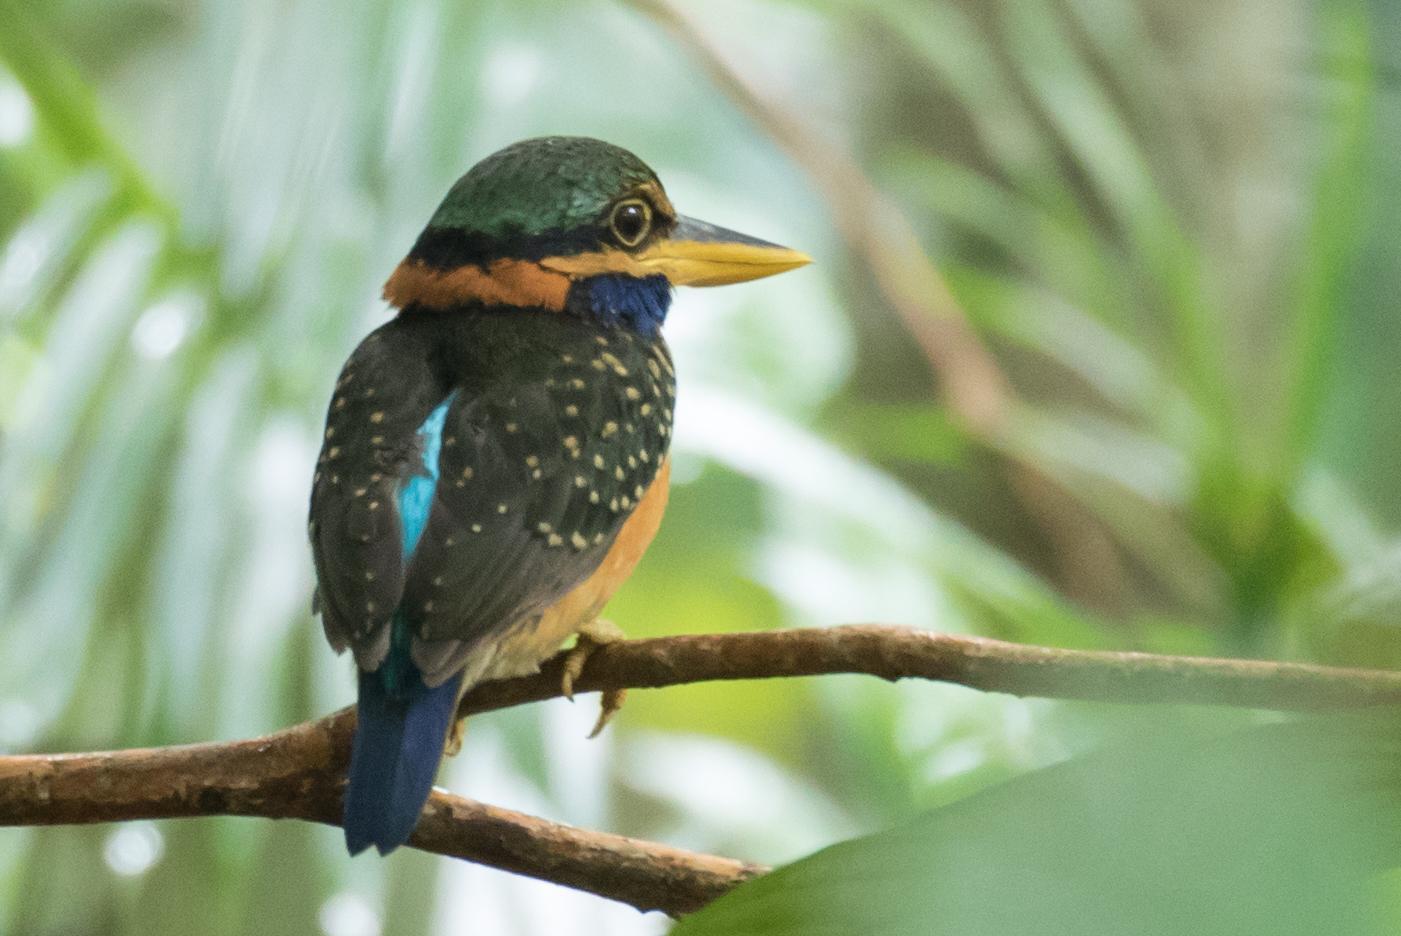 Rufous-collared Kingfisher Photo by Robert Lewis